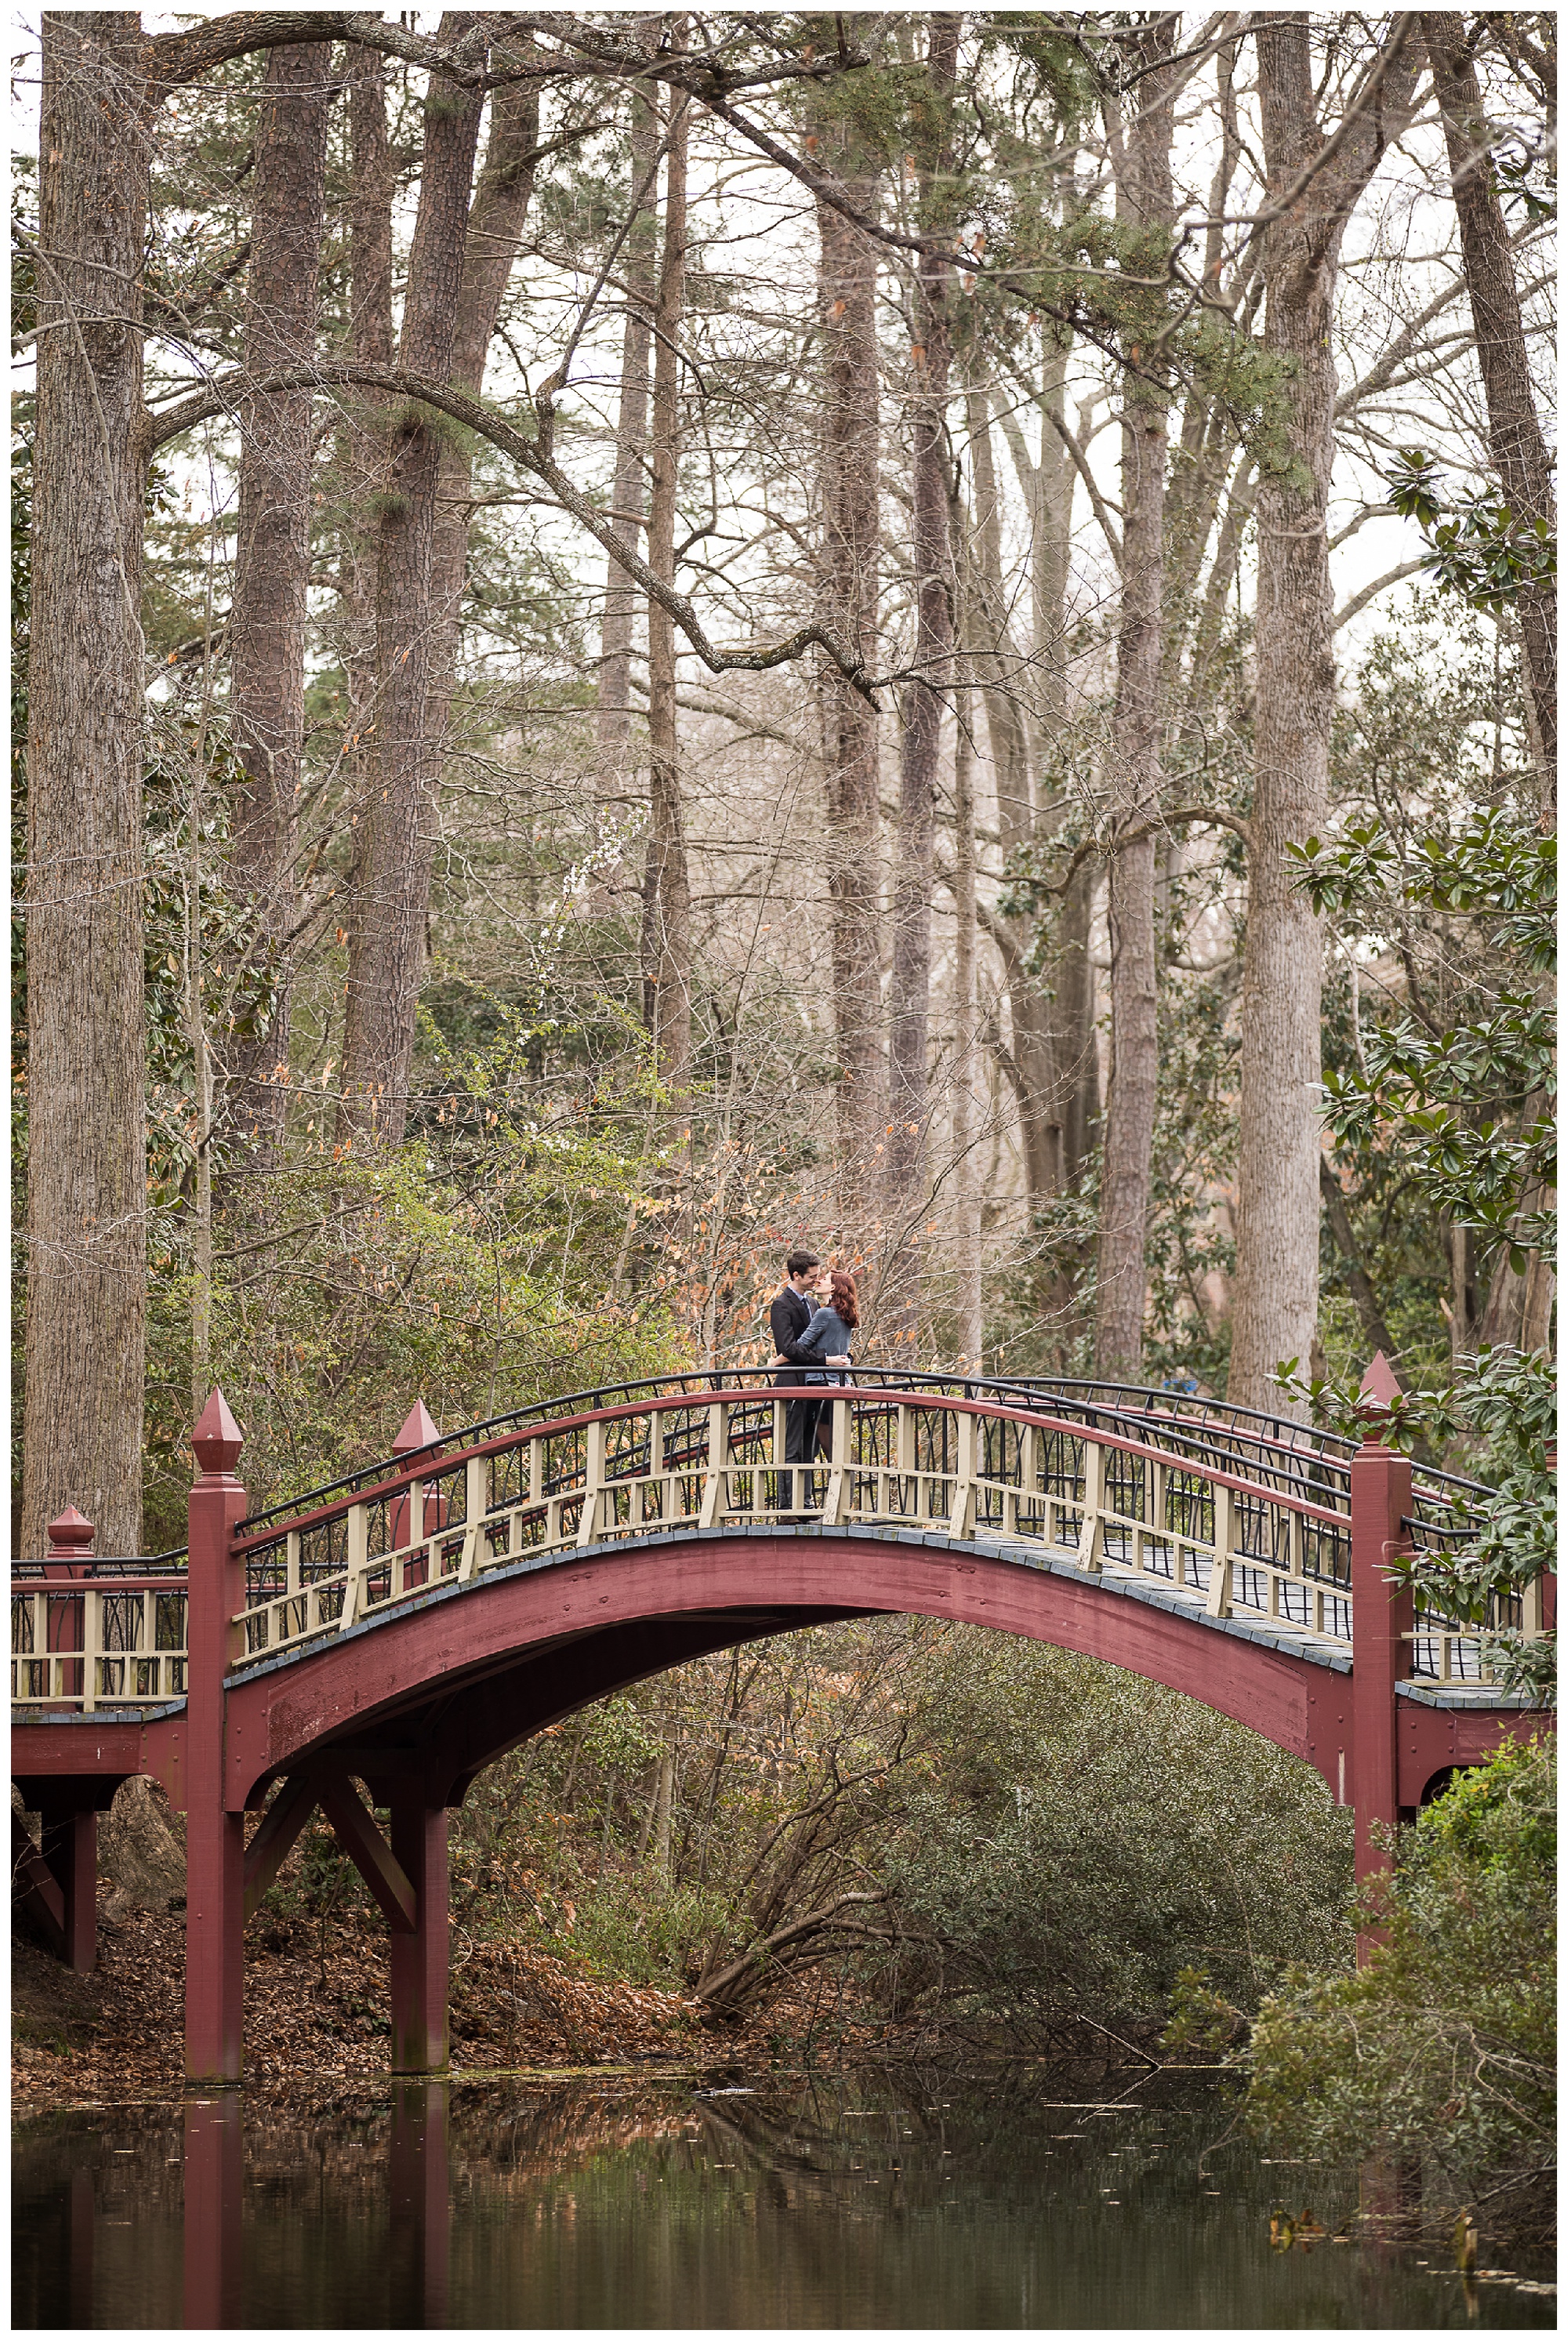 Rachel & Will | William & Mary Engagement Session